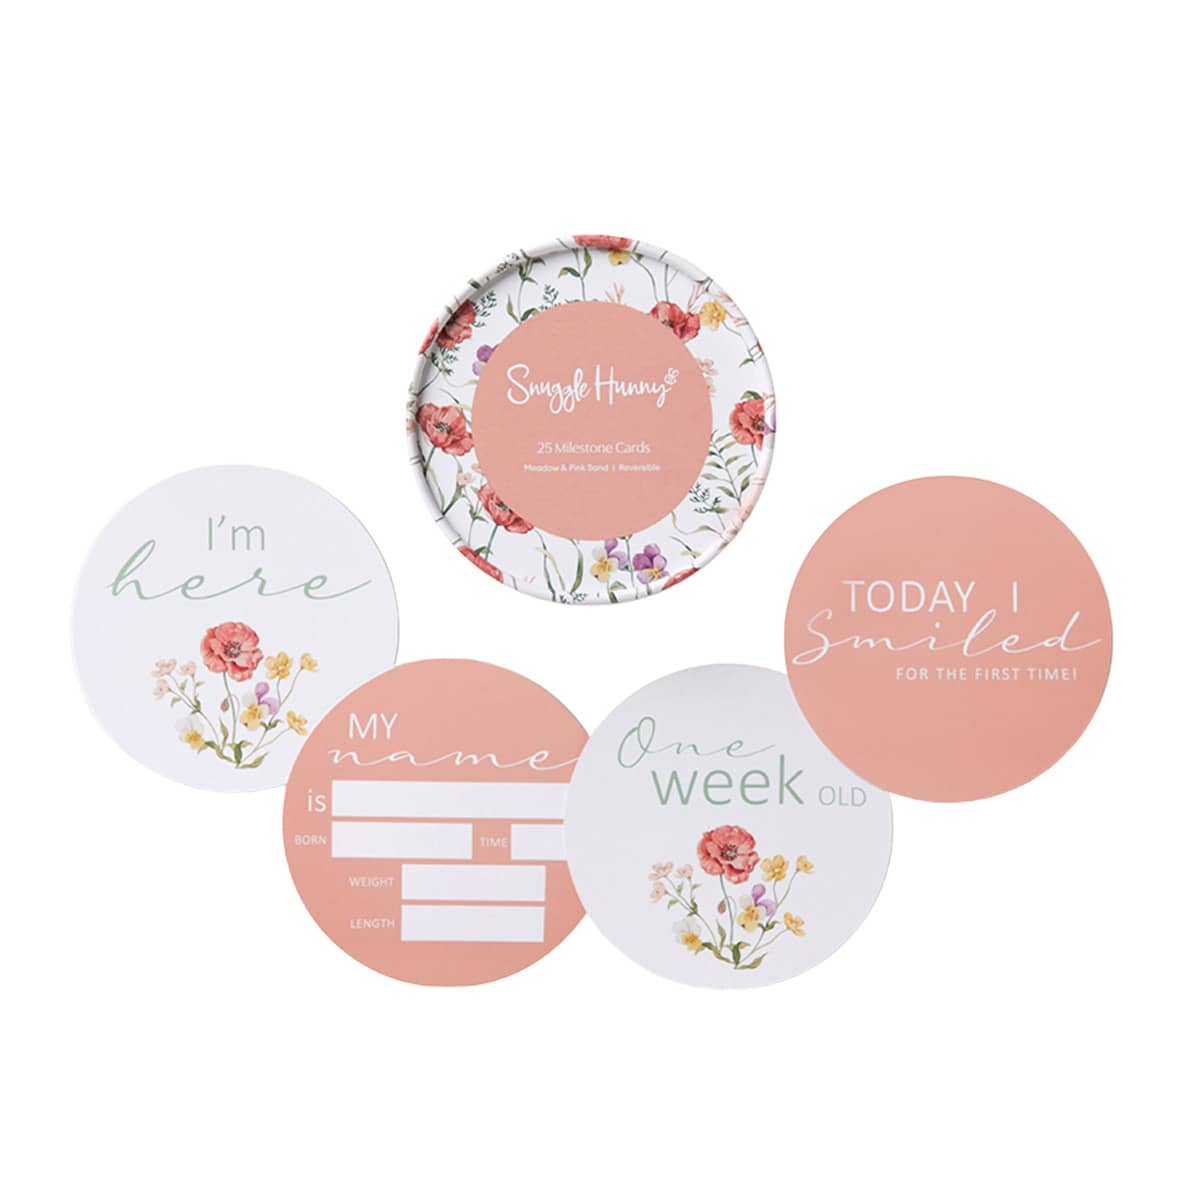 Snuggle Hunny Reversible Milestone Cards - Meadow and Pink Sand